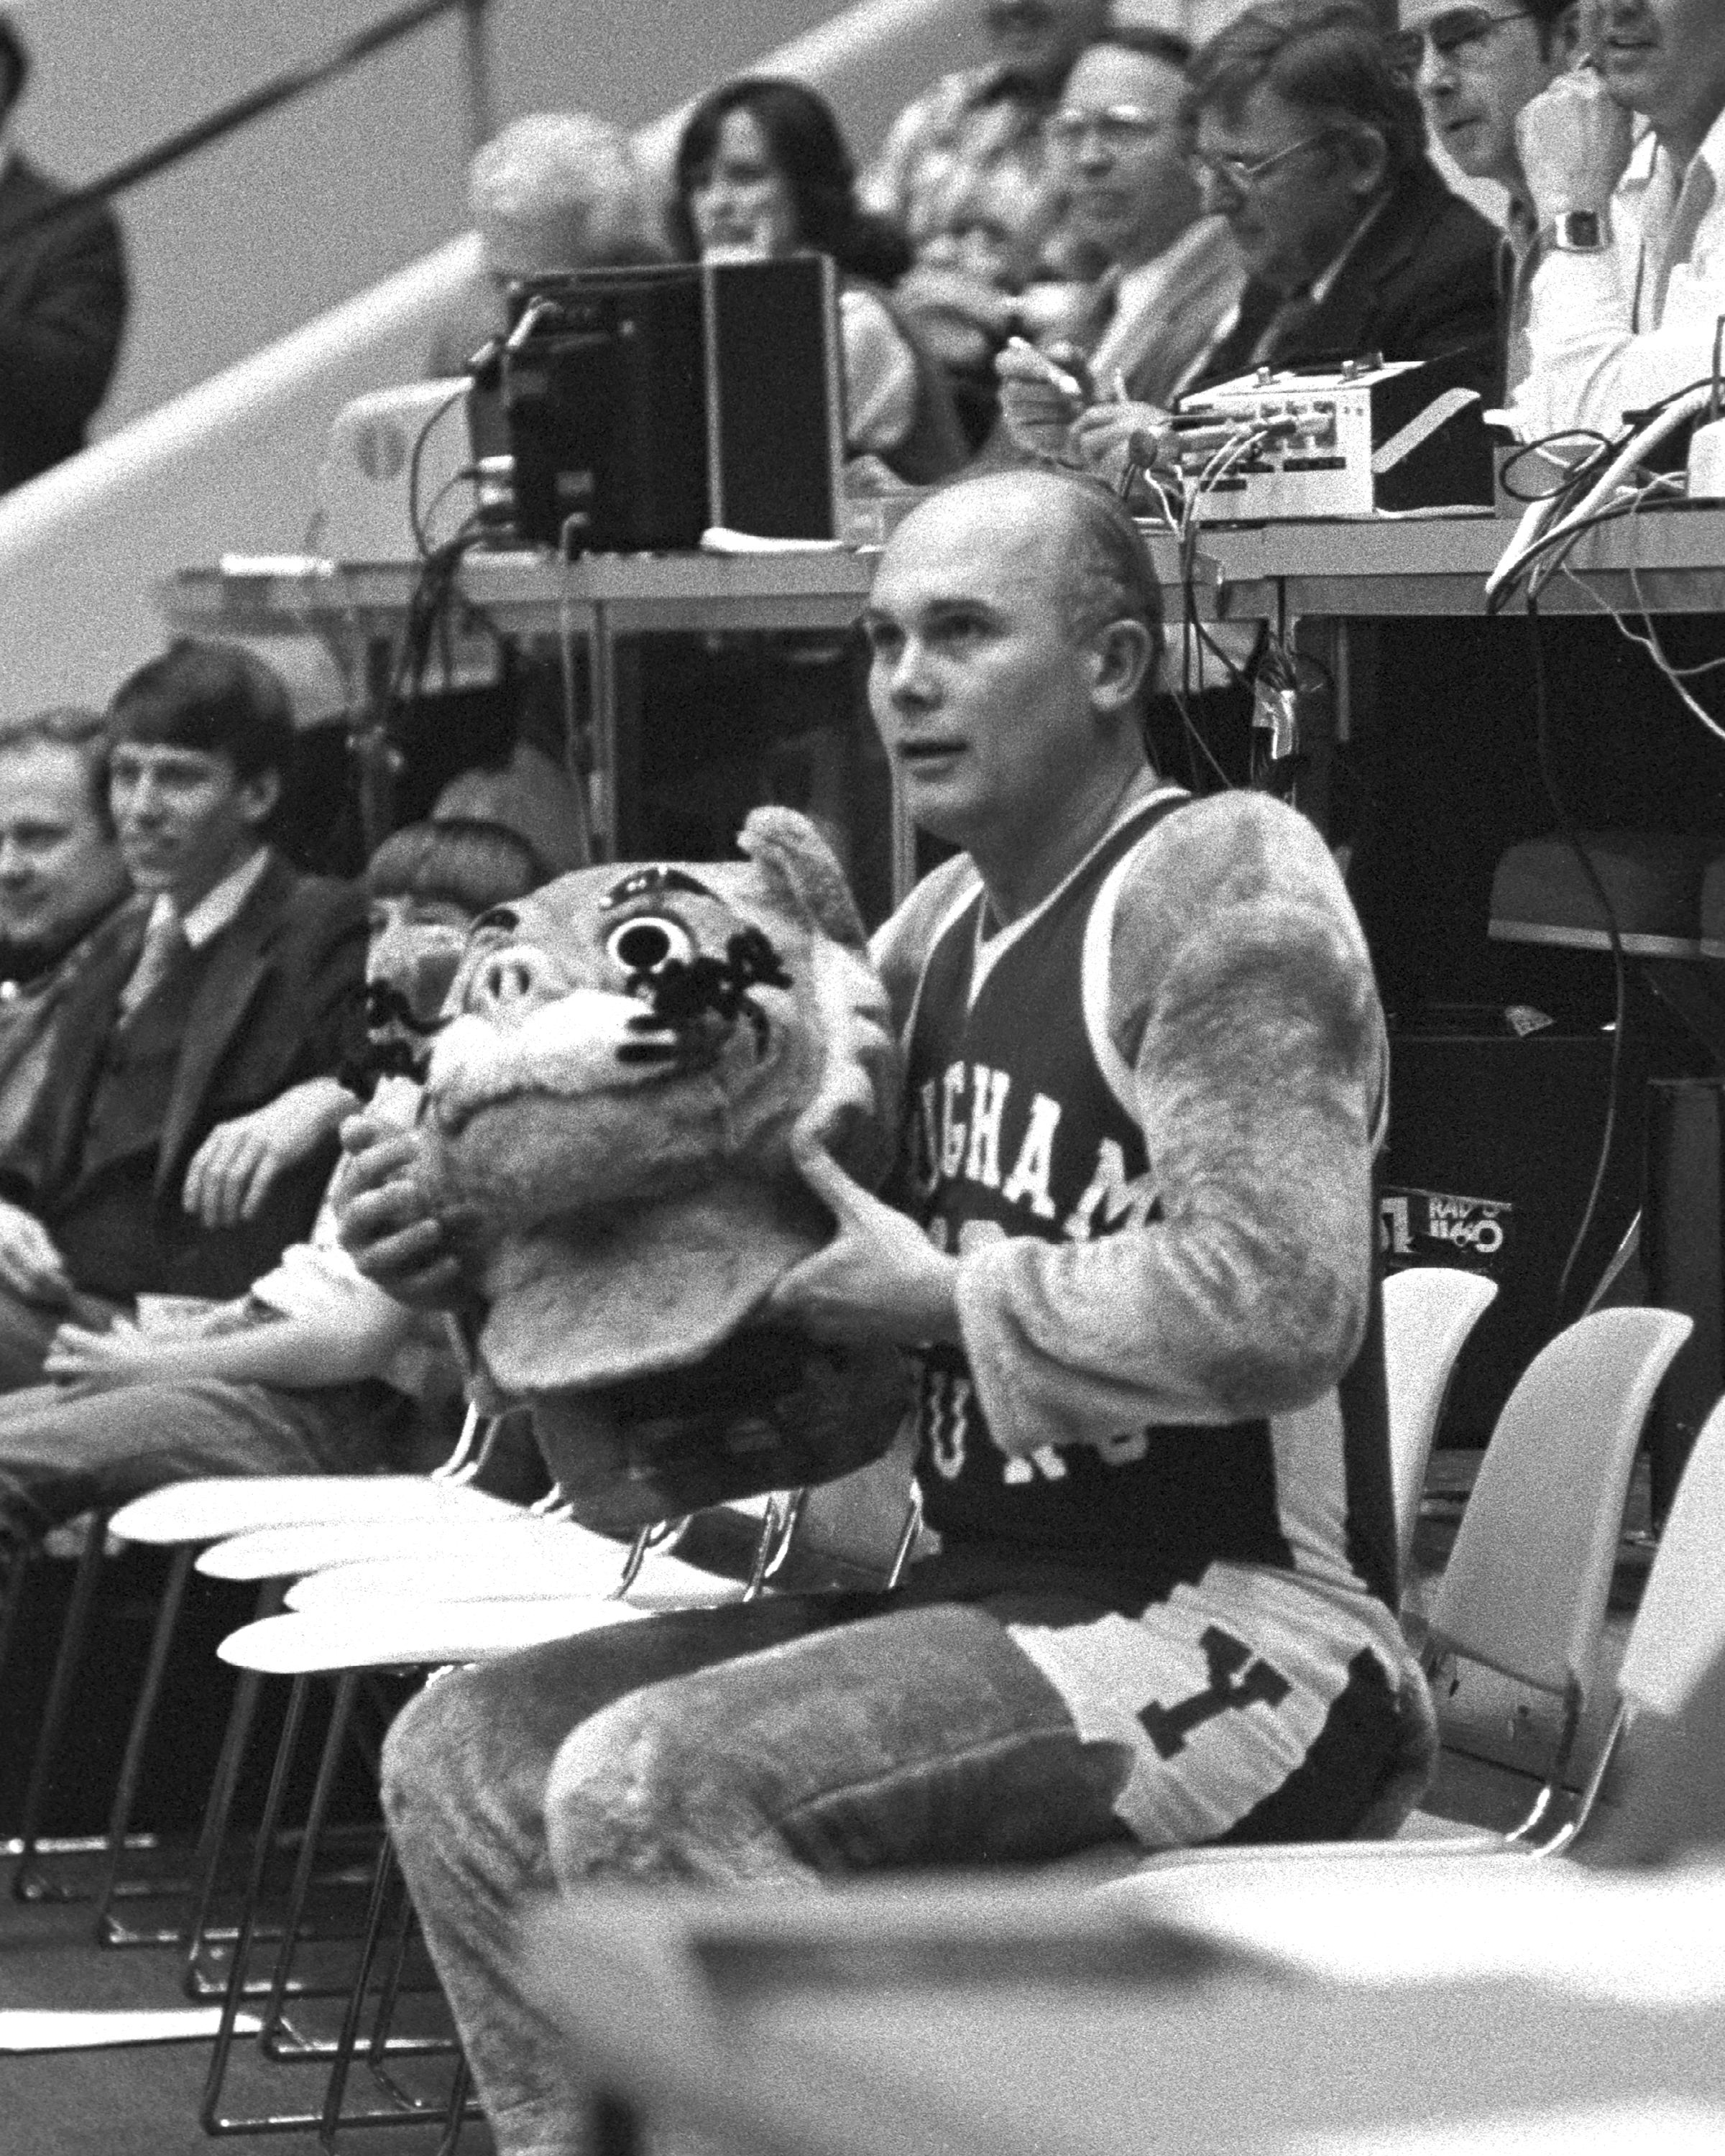 At a basketball game in February 1979, President Dallin H. Oaks took a turn in the Cosmo suit.